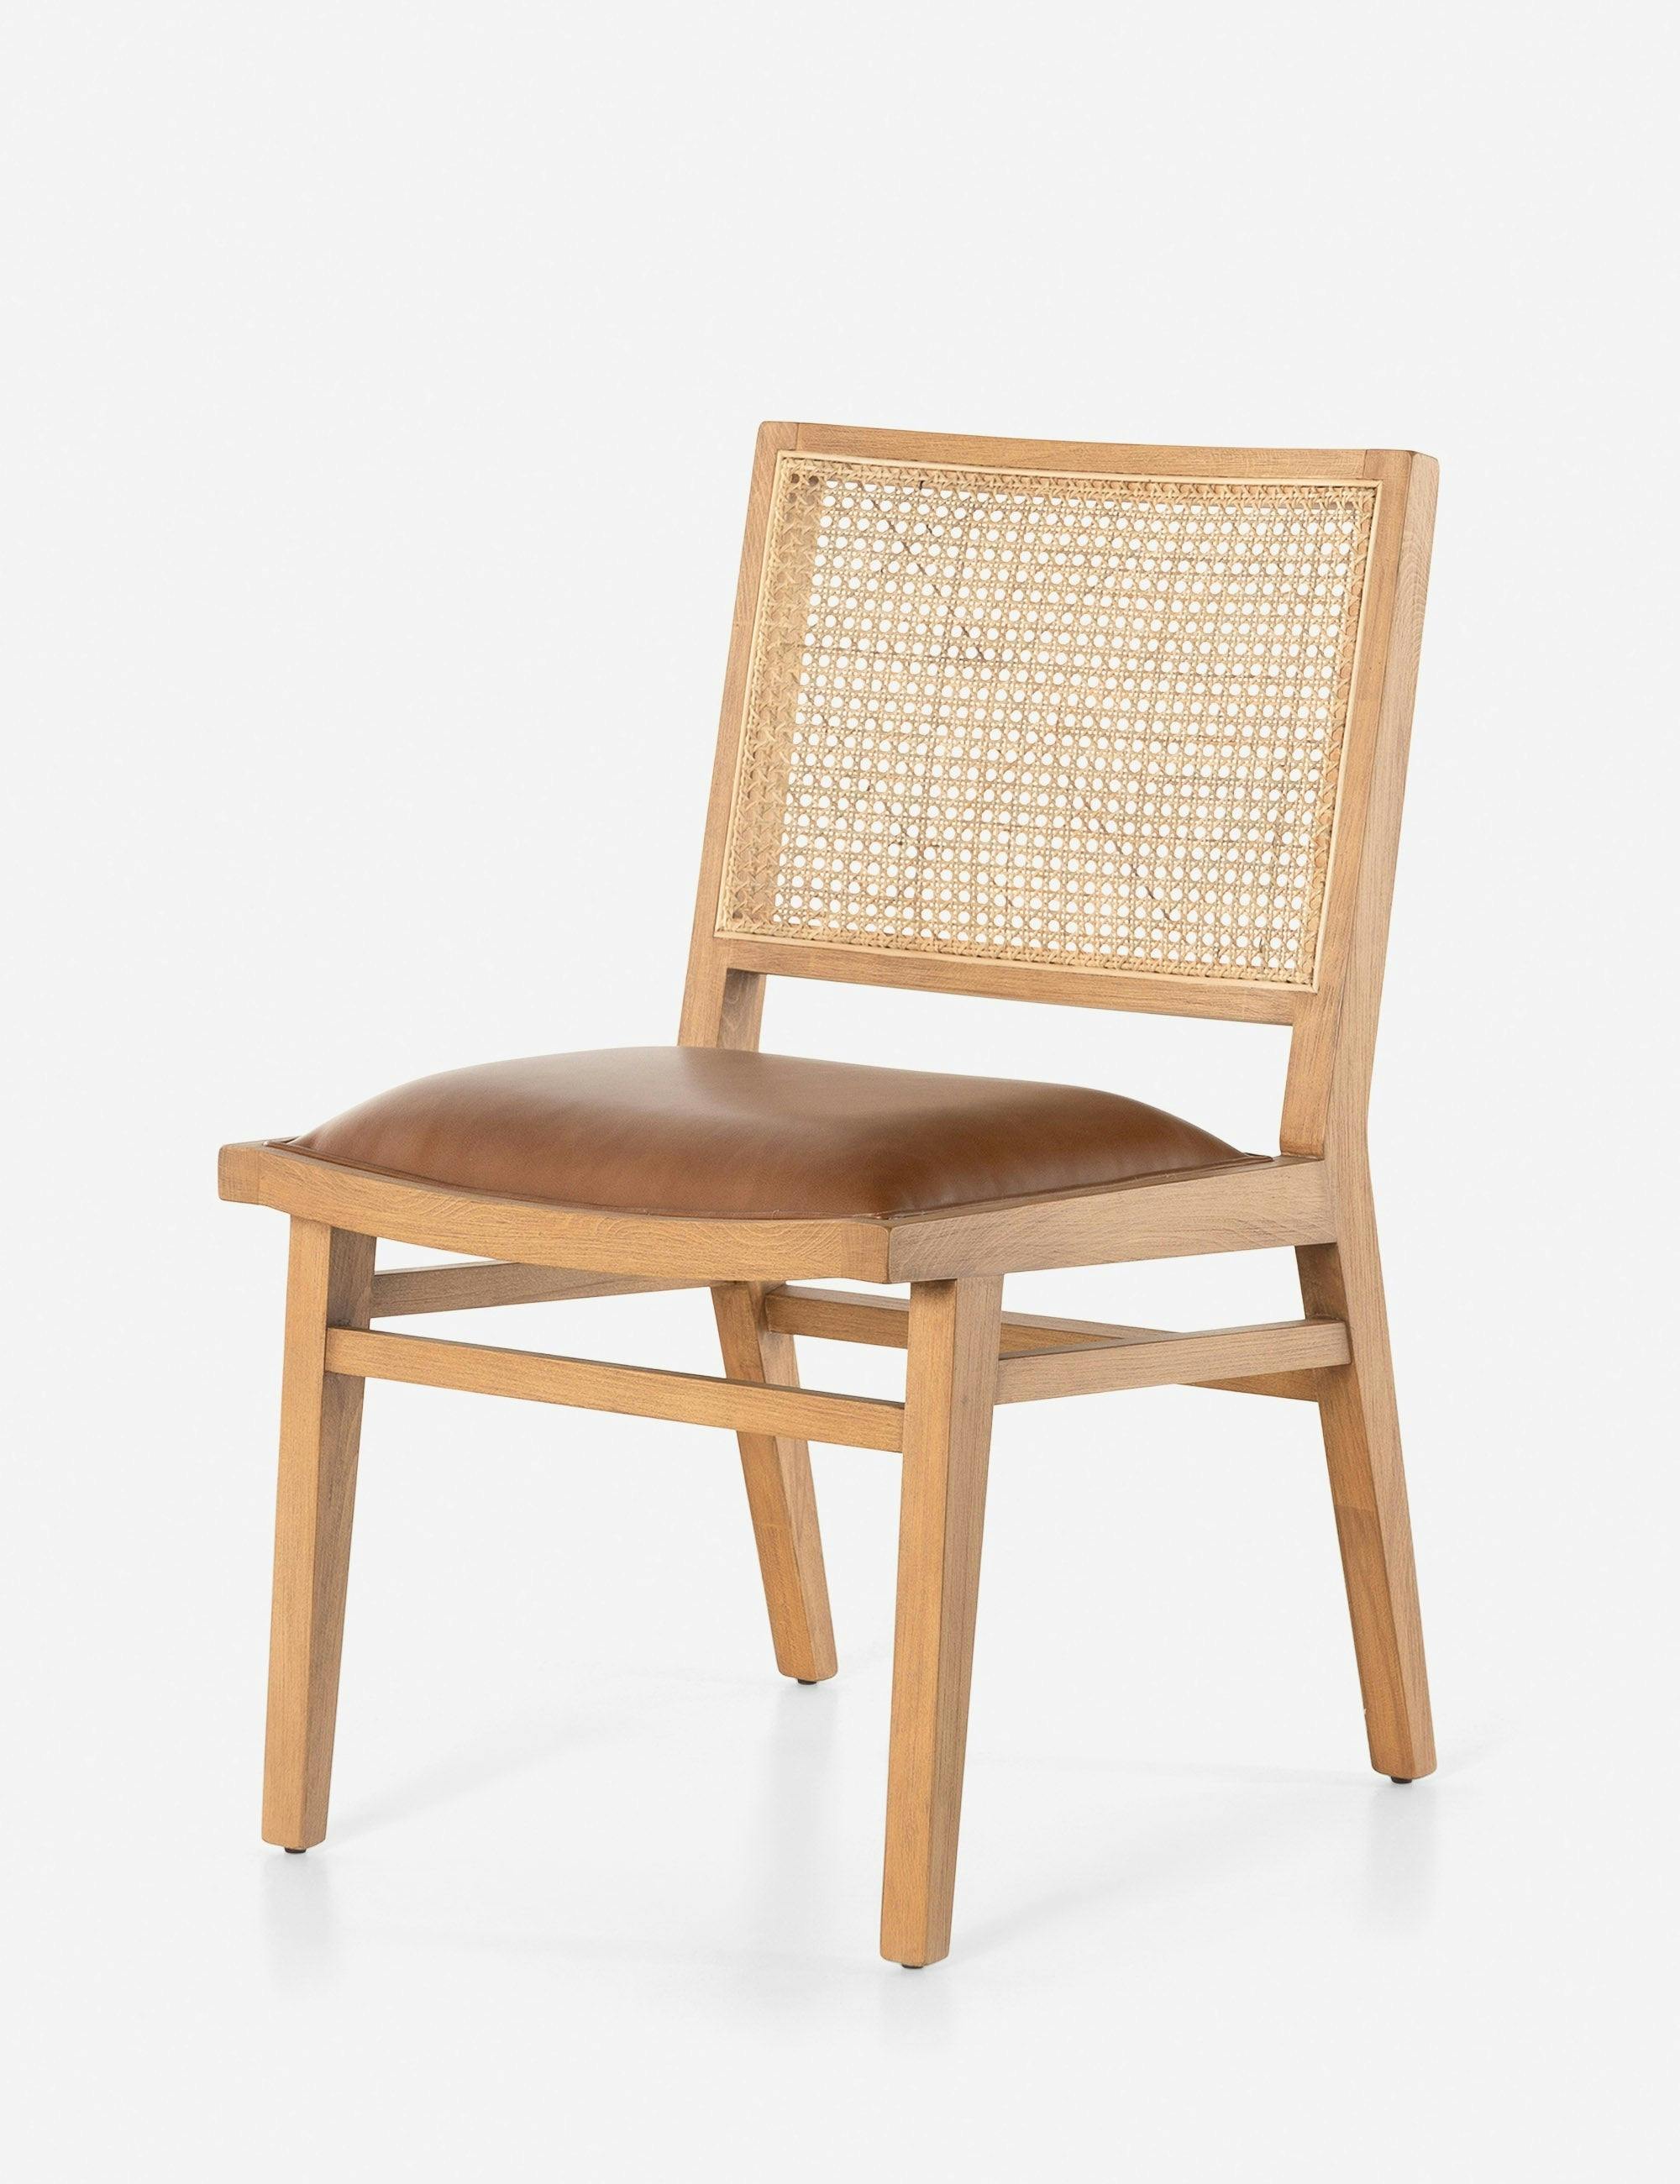 Archie Sierra Butterscotch Leather and Cane Dining Chair